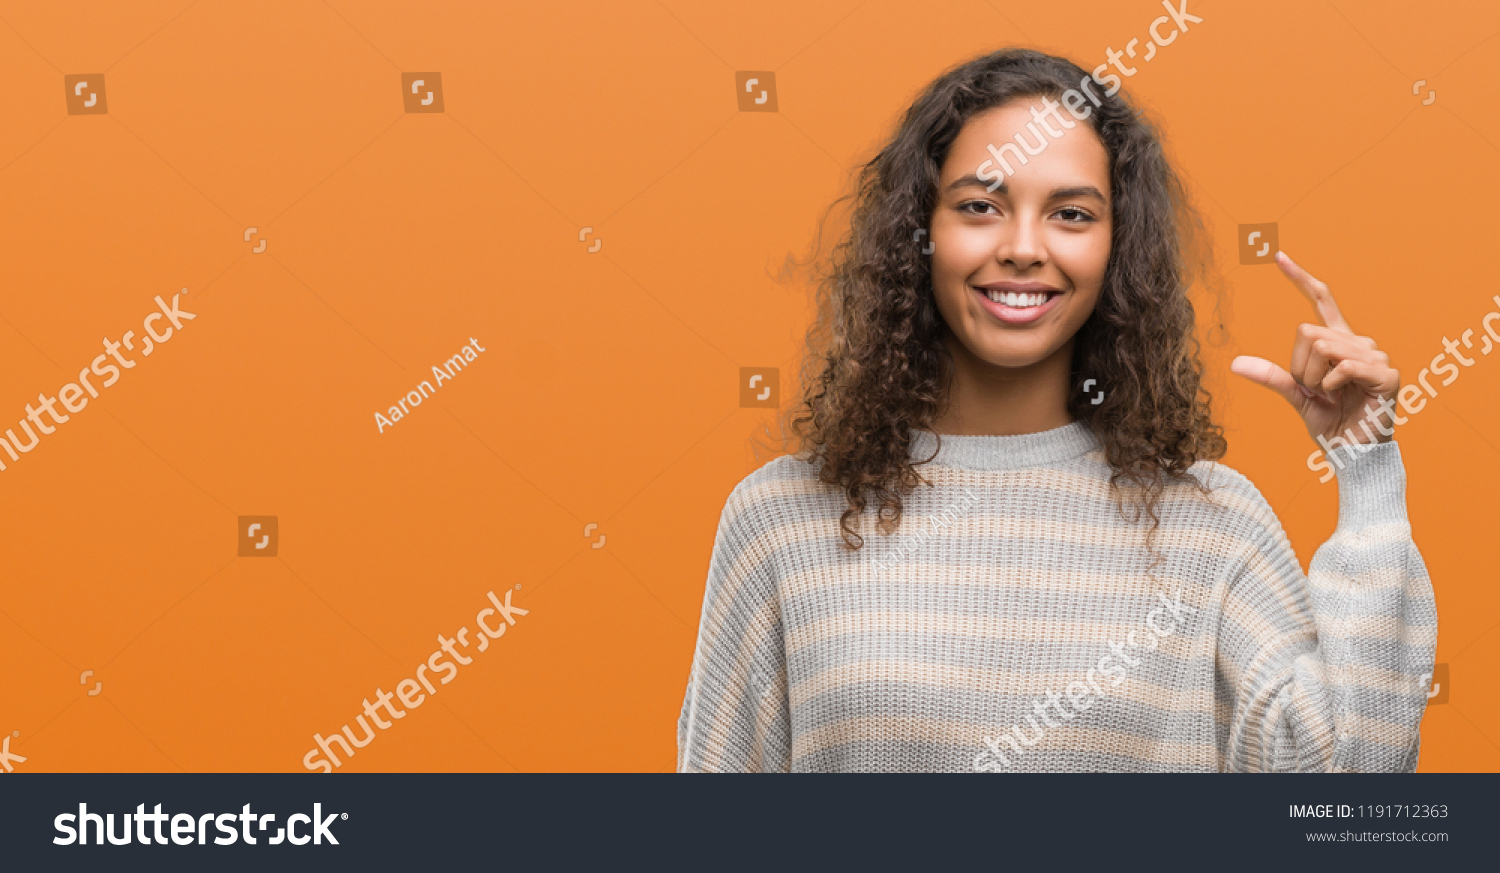 Beautiful young hispanic woman wearing stripes sweater smiling and confident gesturing with hand doing size sign with fingers while looking and the camera. Measure concept. #1191712363